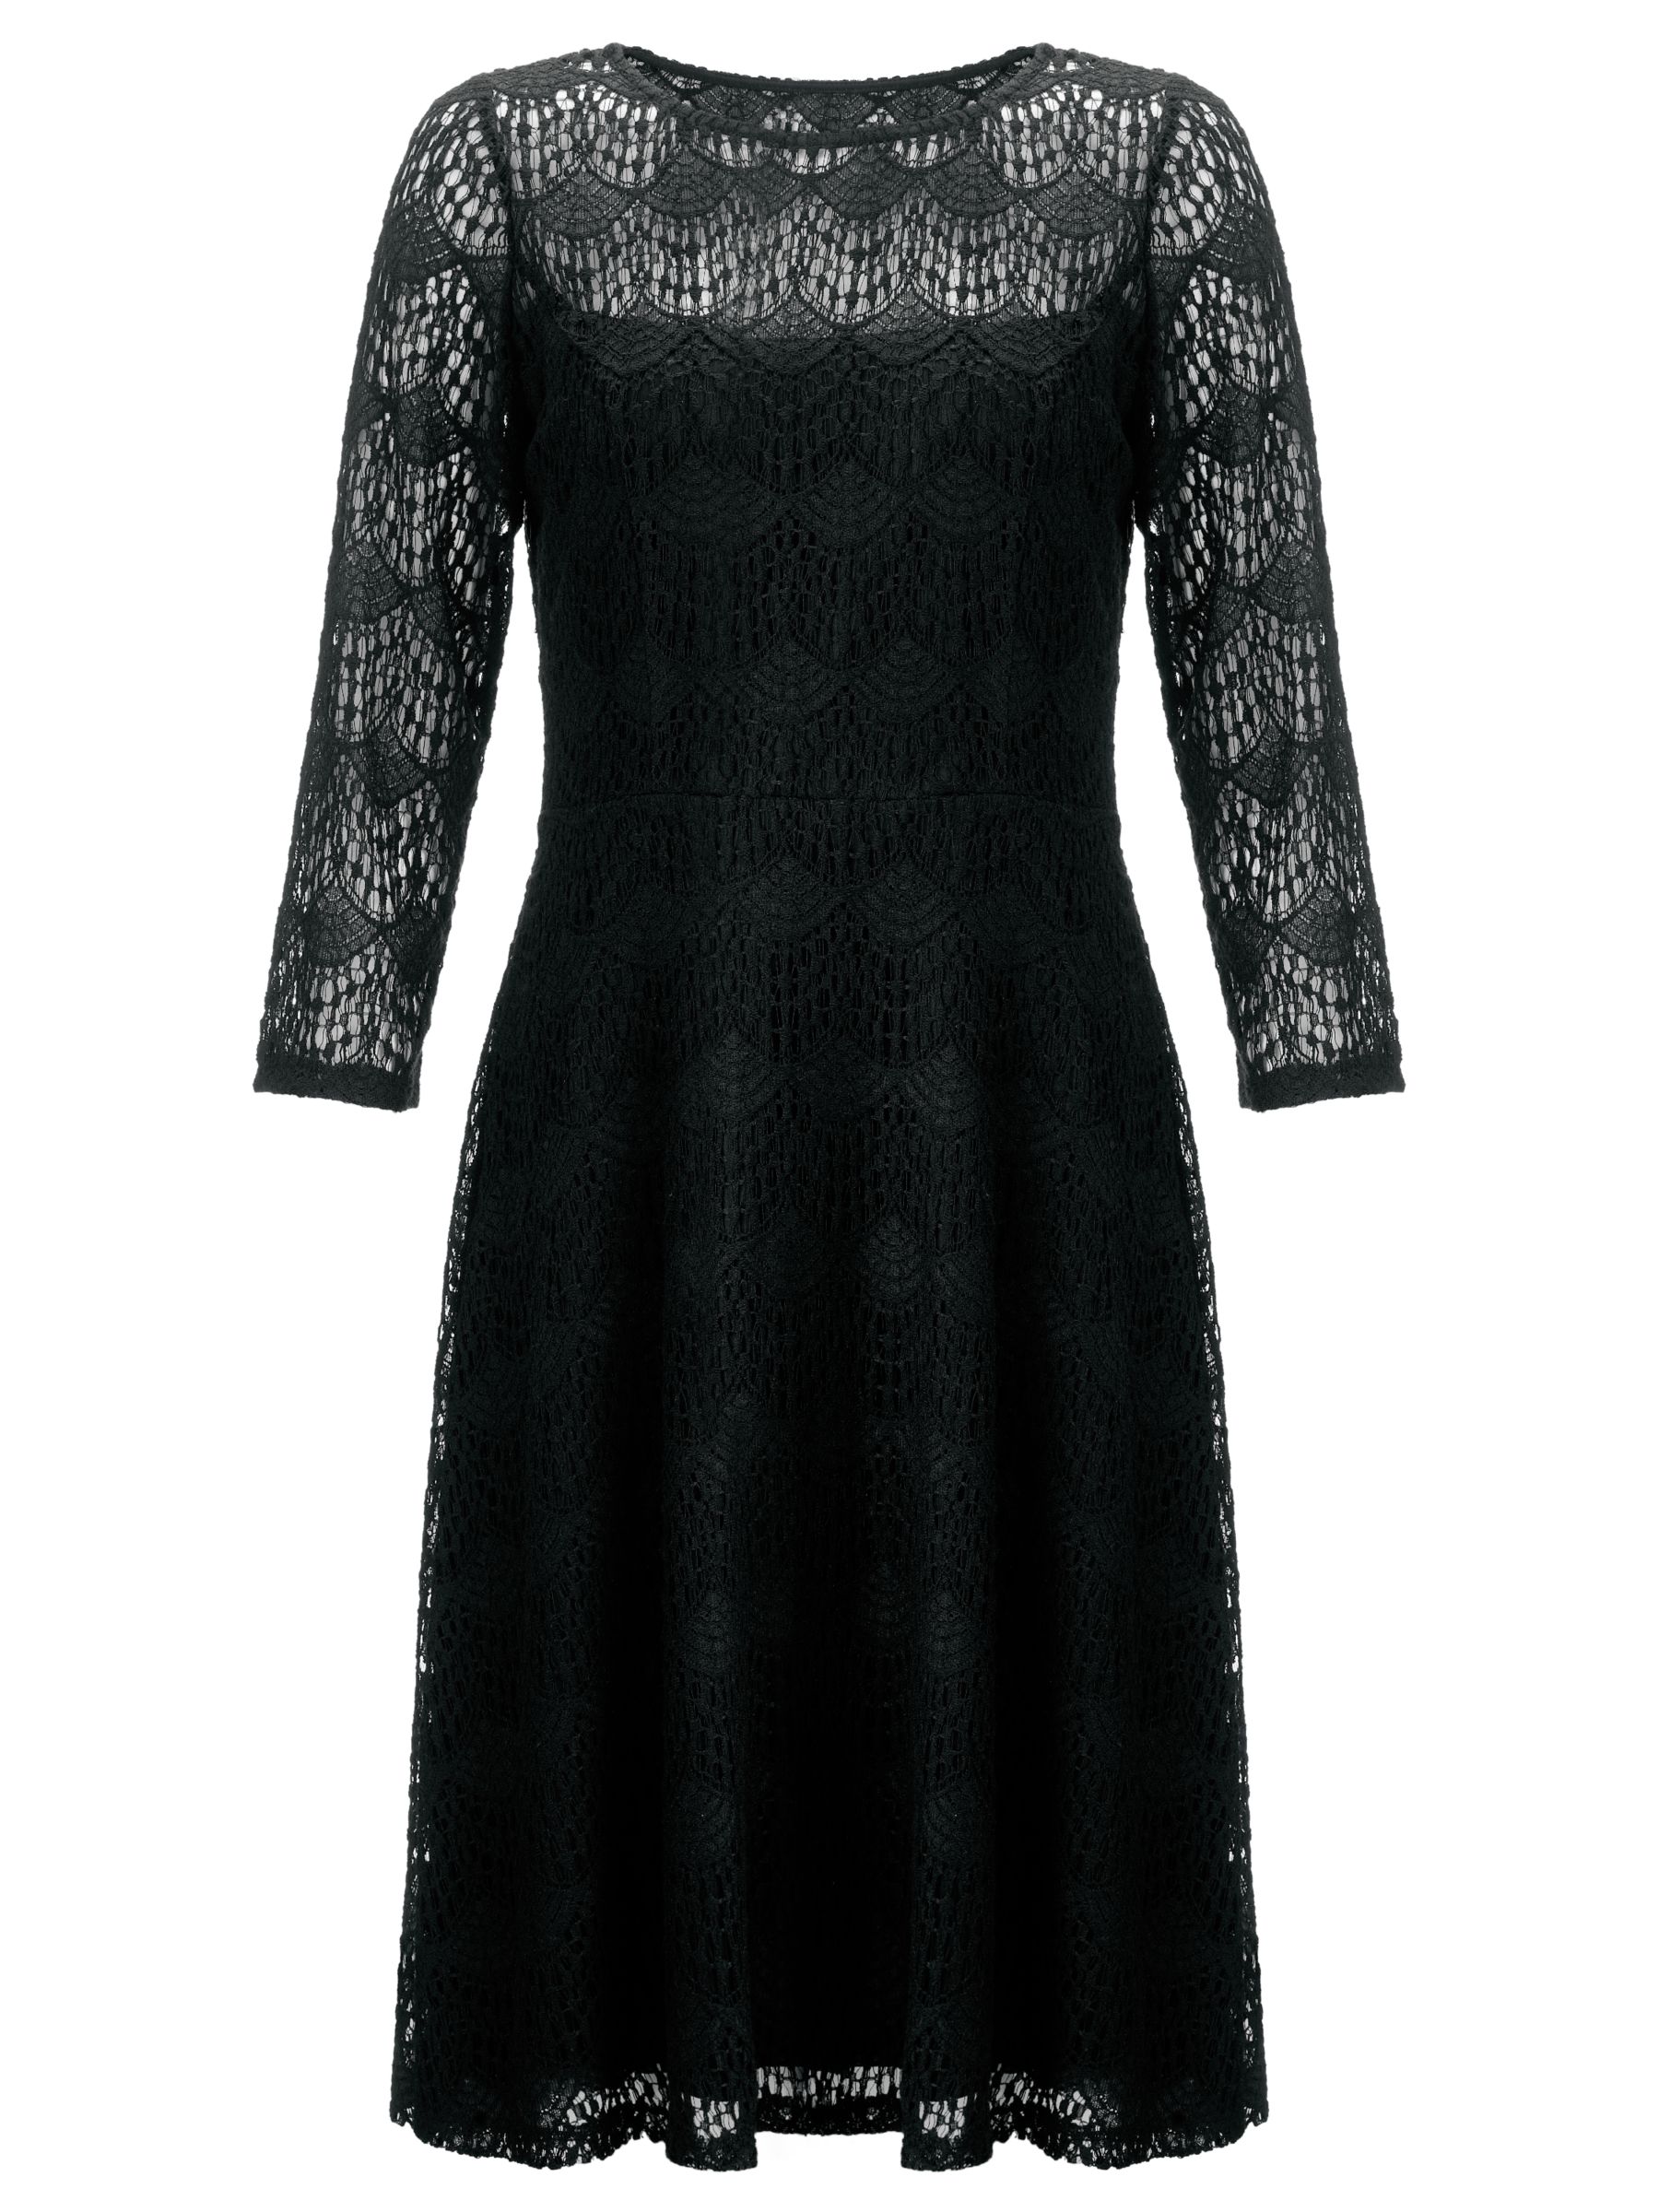 Somerset by Alice Temperley Deco Lace Dress, Black